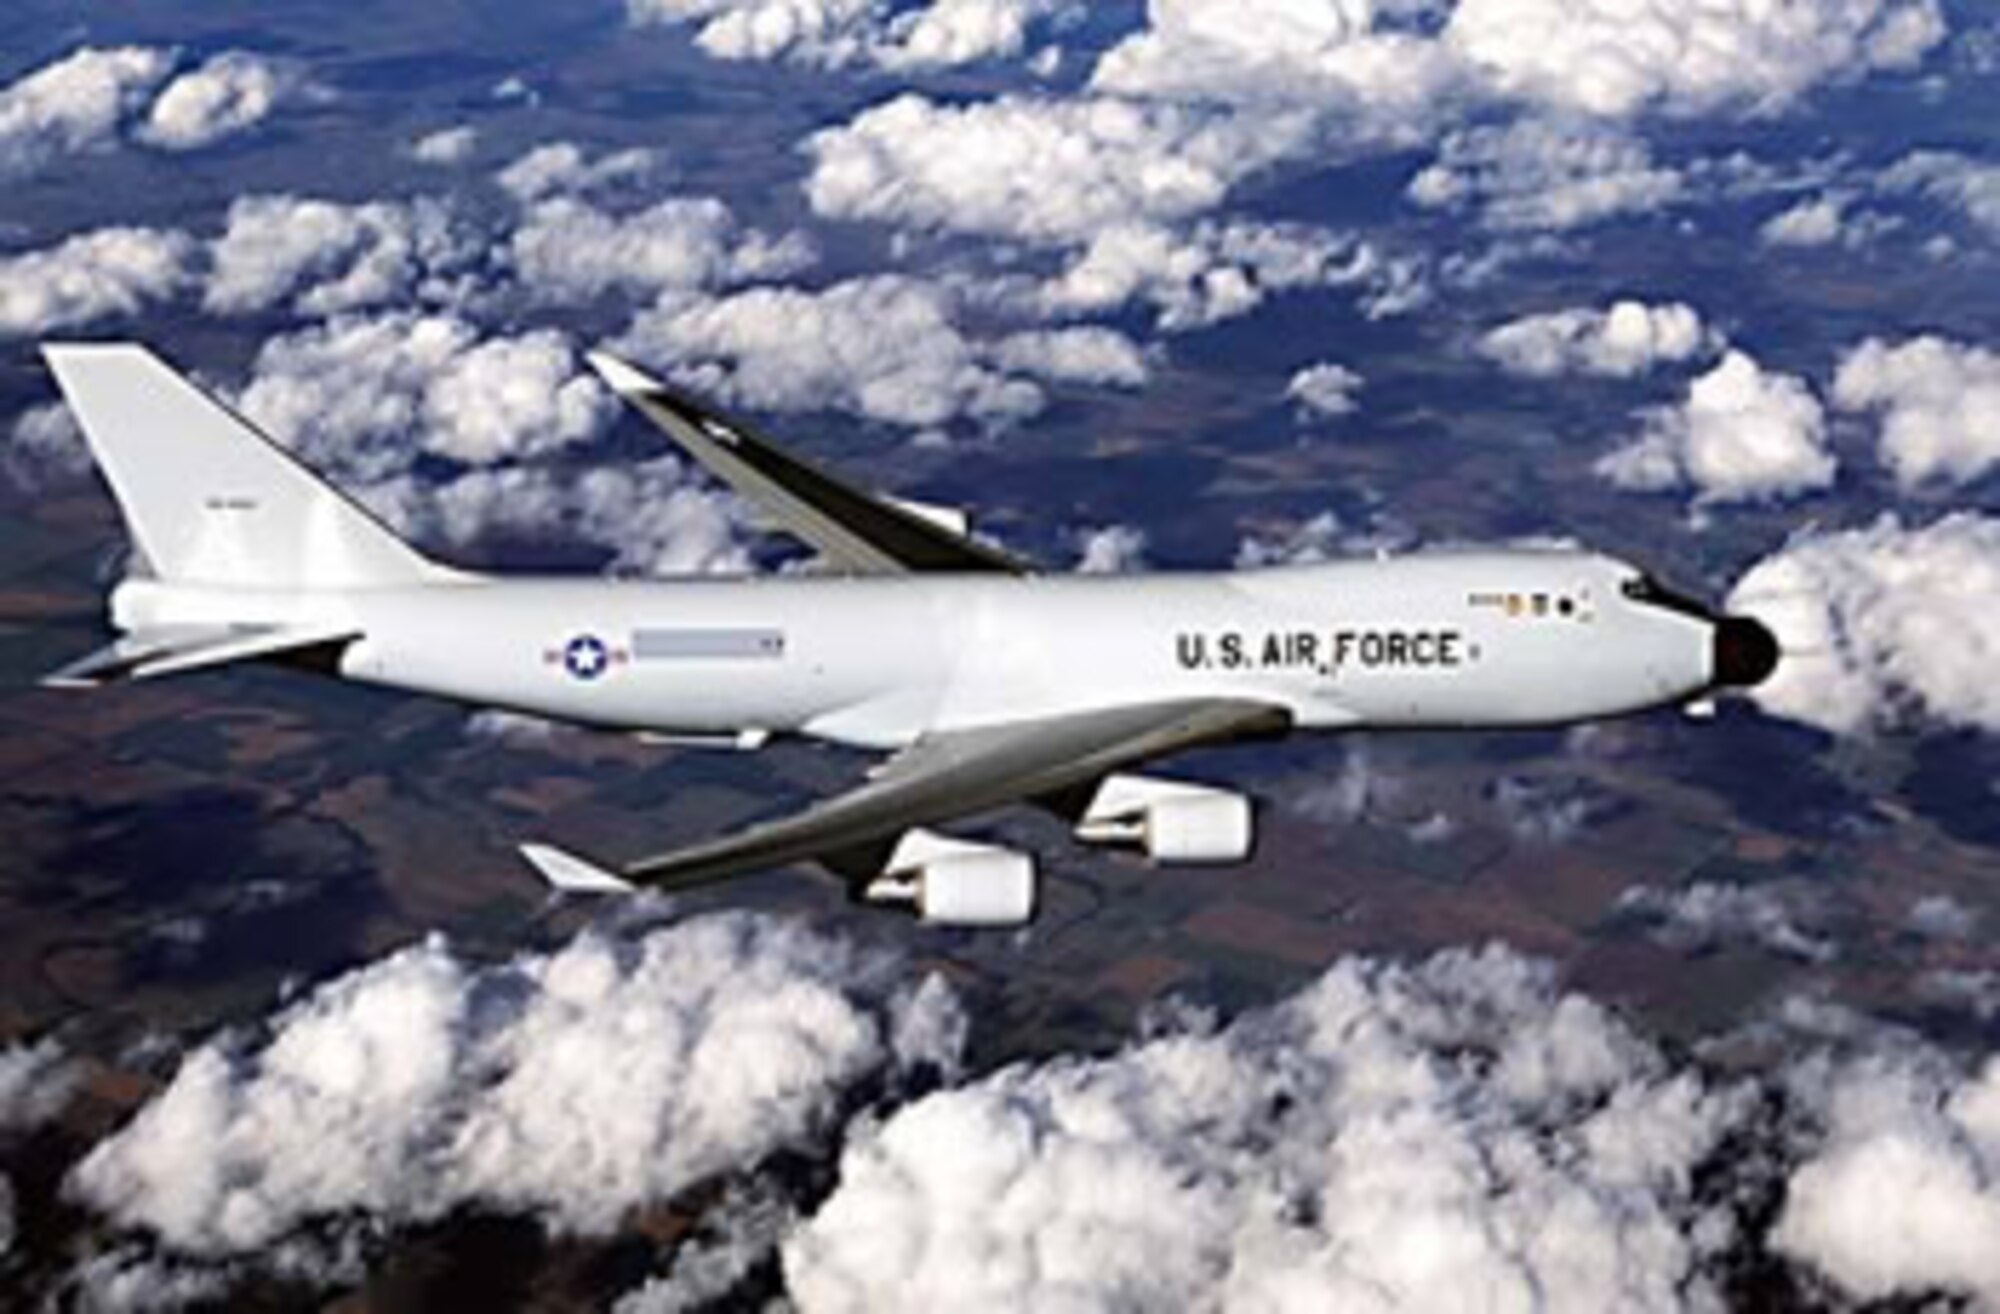 The AFOSR molecular dynamics program has generated new technologies such as the chemical oxygen iodine laser (COIL) which is the centerpiece of the U.S. Air Force Airborne Laser system.